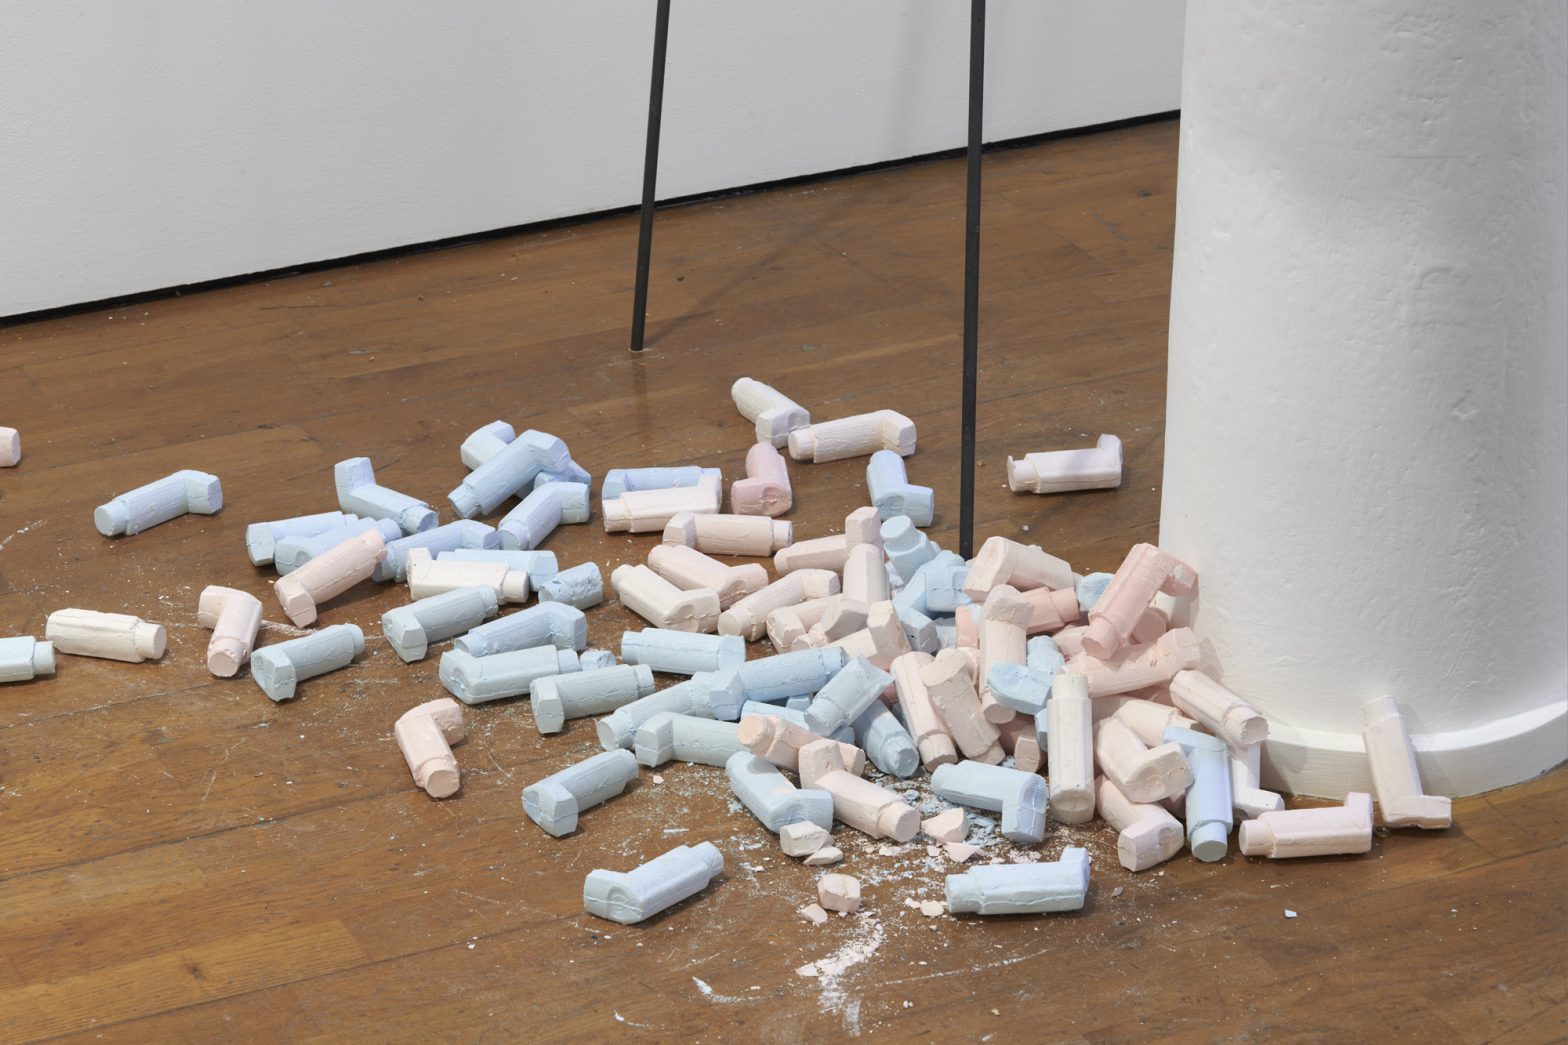 Soft pink and blue coloured asthma inhalers cast in plaster in a pile on a wooden floor, some of them broken up.